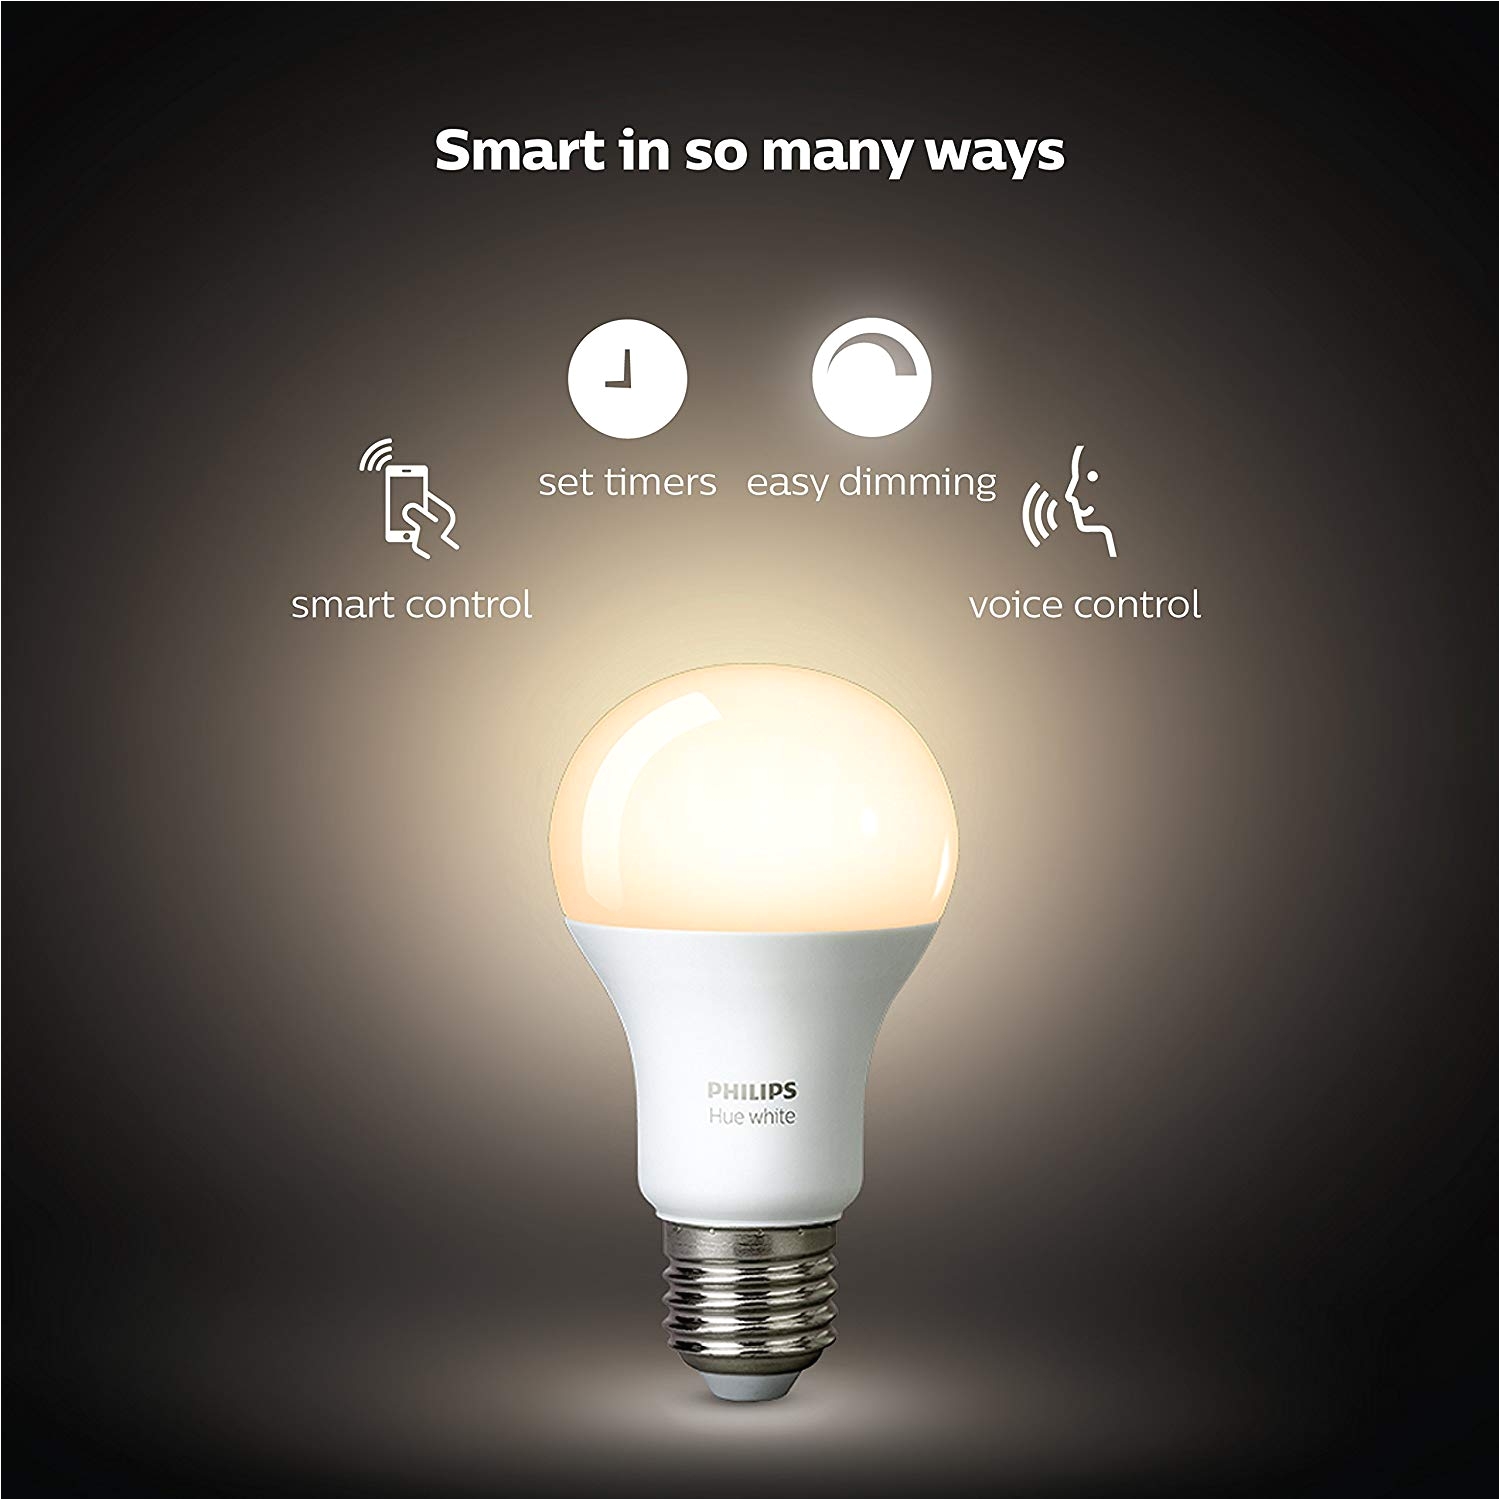 philips hue white a19 60w equivalent dimmable led smart bulb starter kit 2 a19 60w white bulbs and 1 hub compatible with amazon alexa apple homekit and